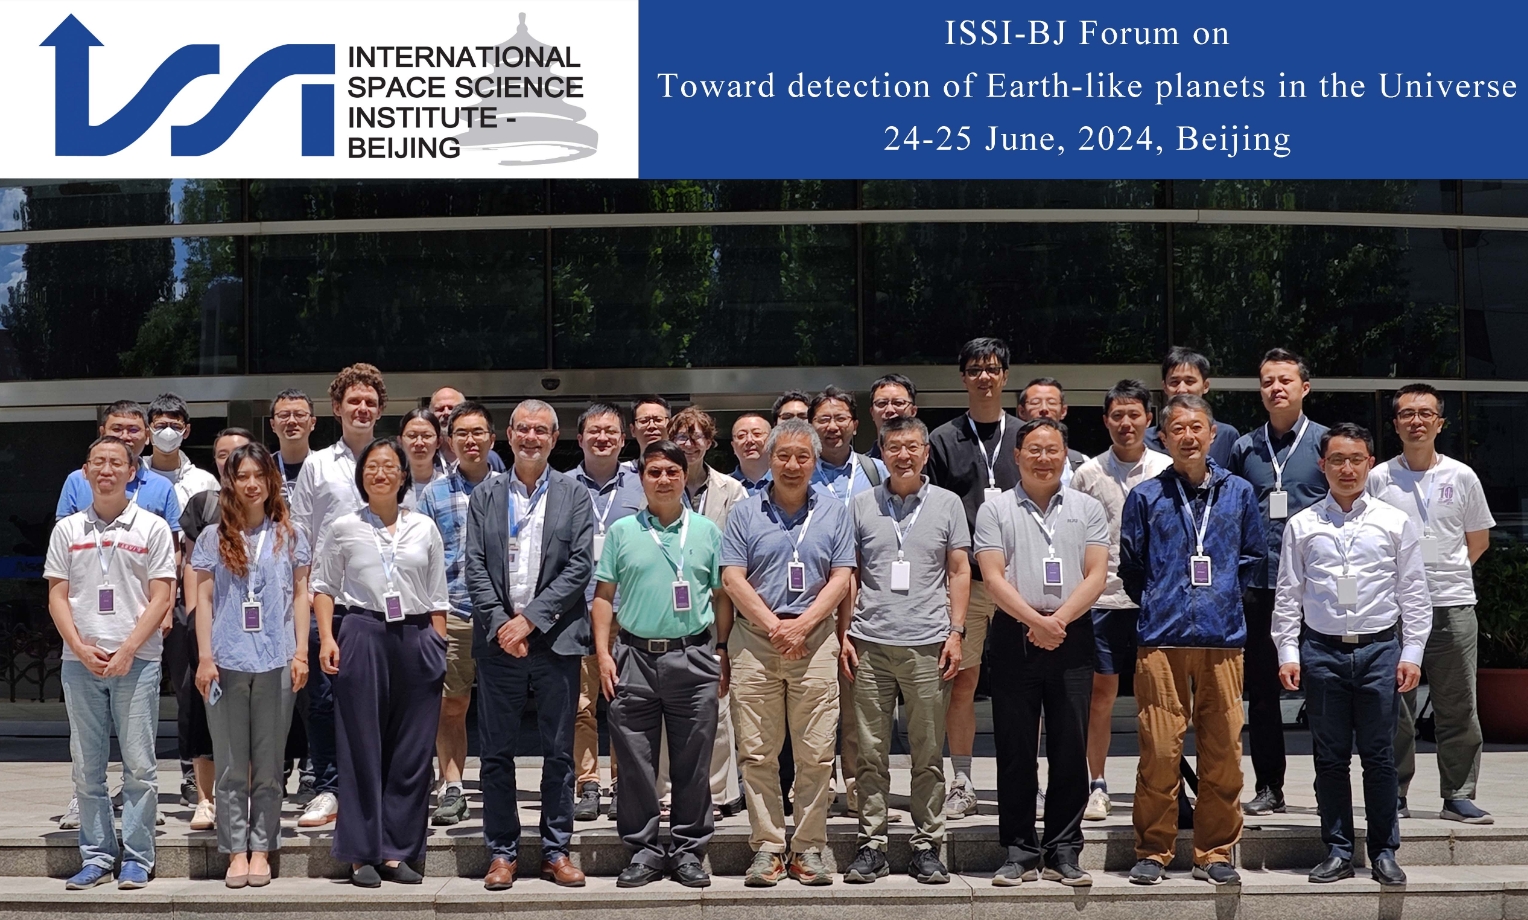 ISSI-BJ Forum on “Toward detection of Earth-like planets in the Universe” successfully held on 24-25 June 2024